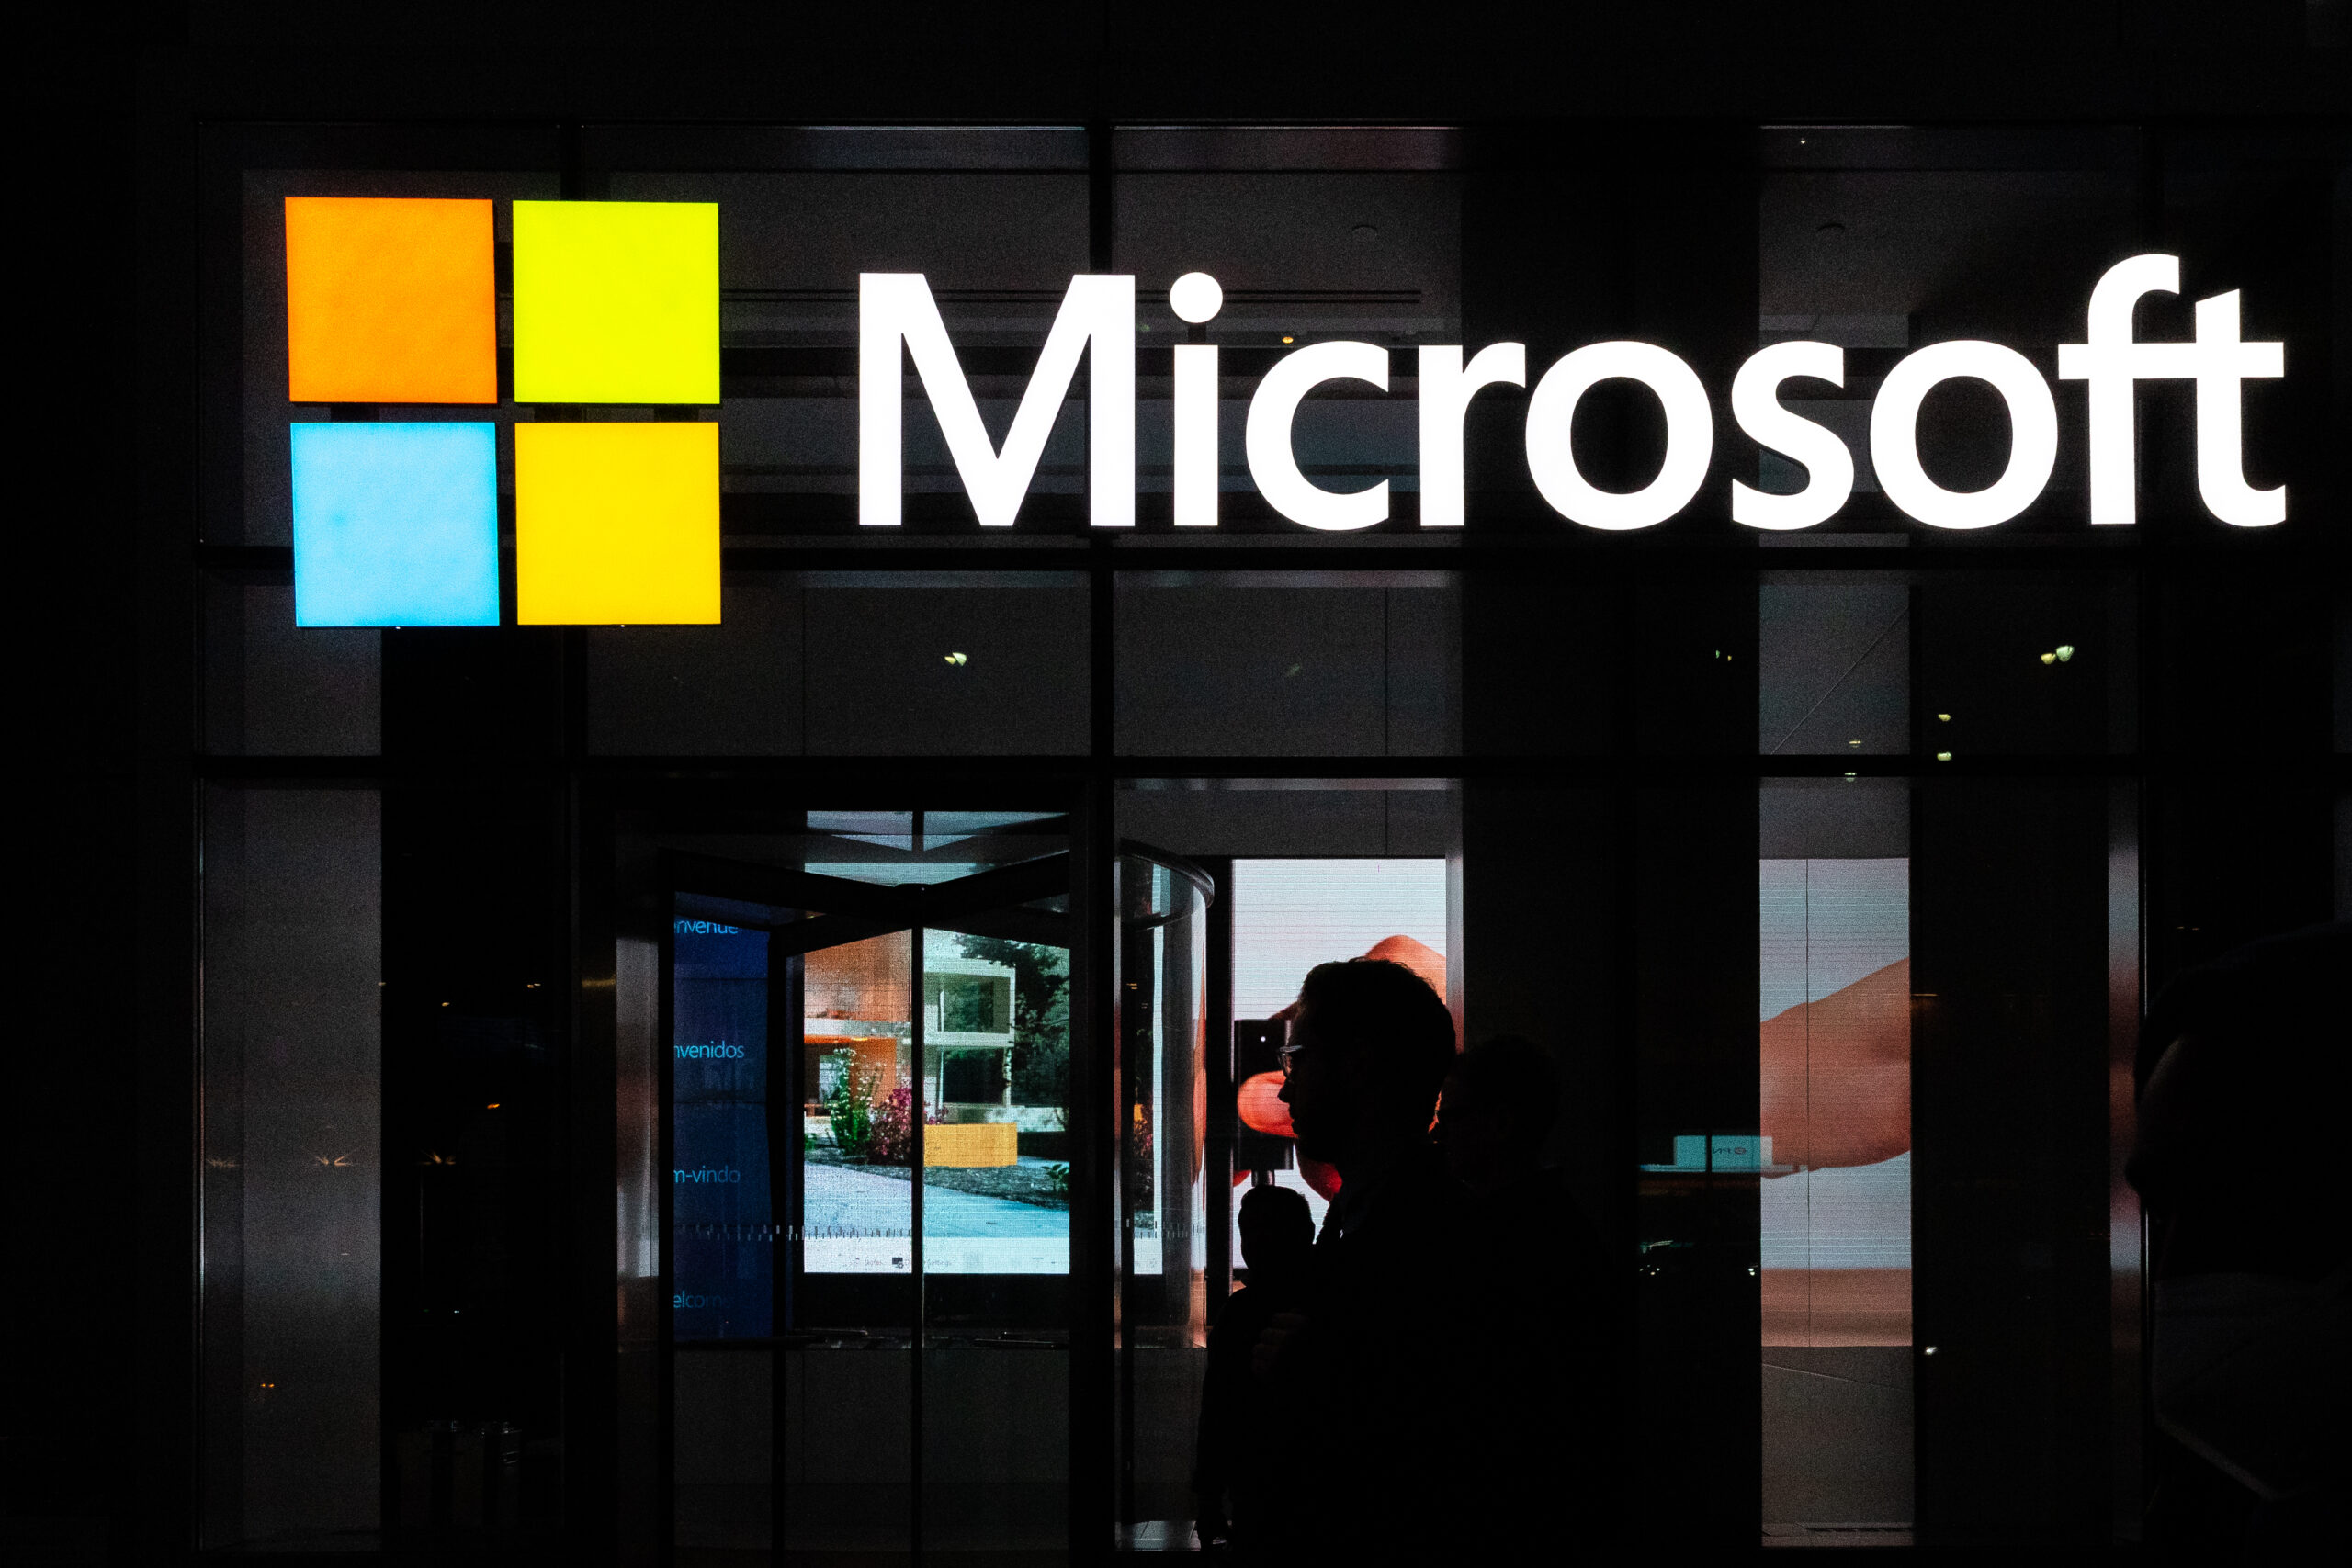 Microsoft employees spent years fighting the tech giant's oil ties. Now, they’re speaking out.